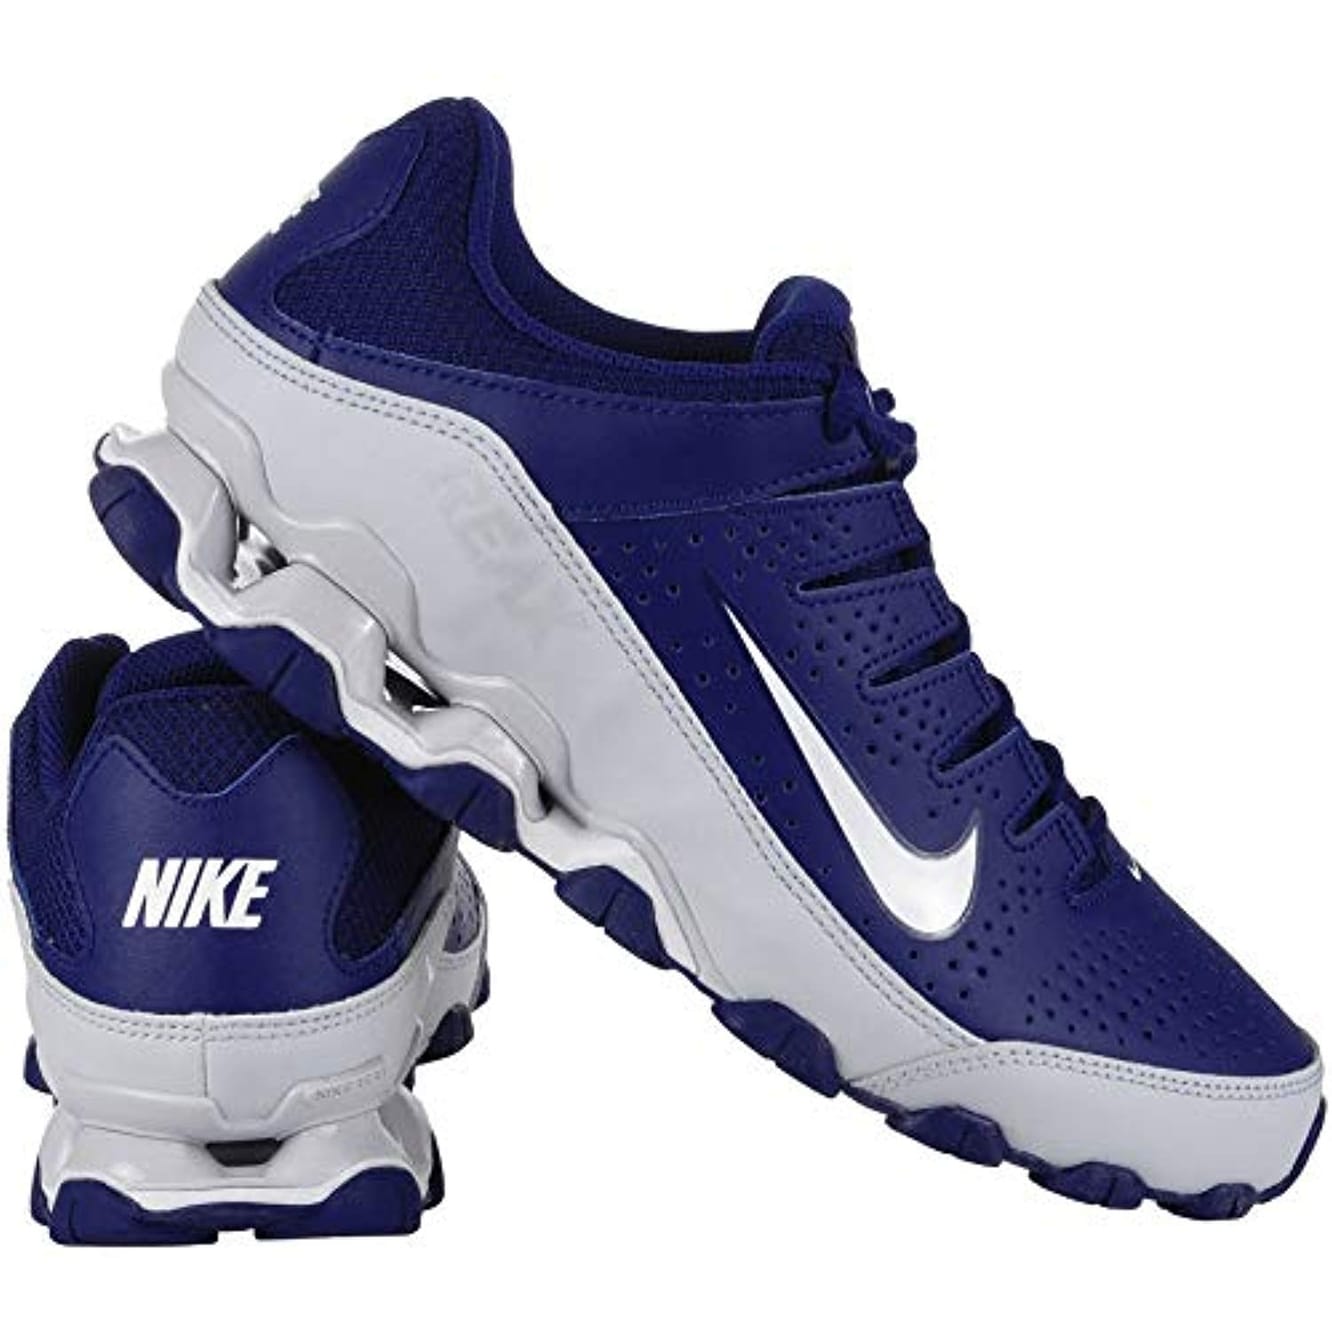 size 8 women's basketball shoes